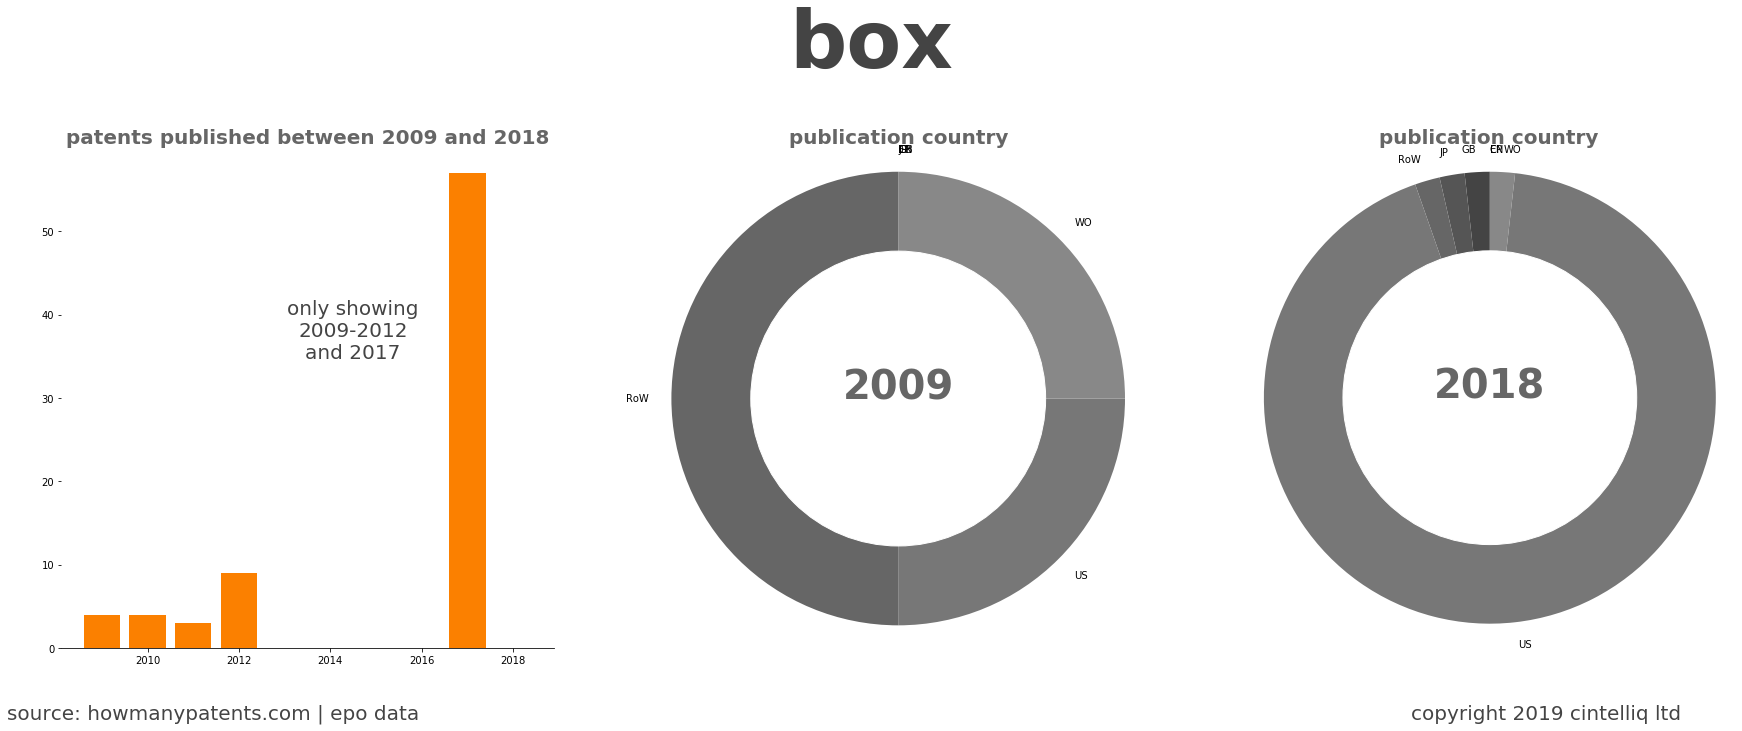 summary of patents for Box